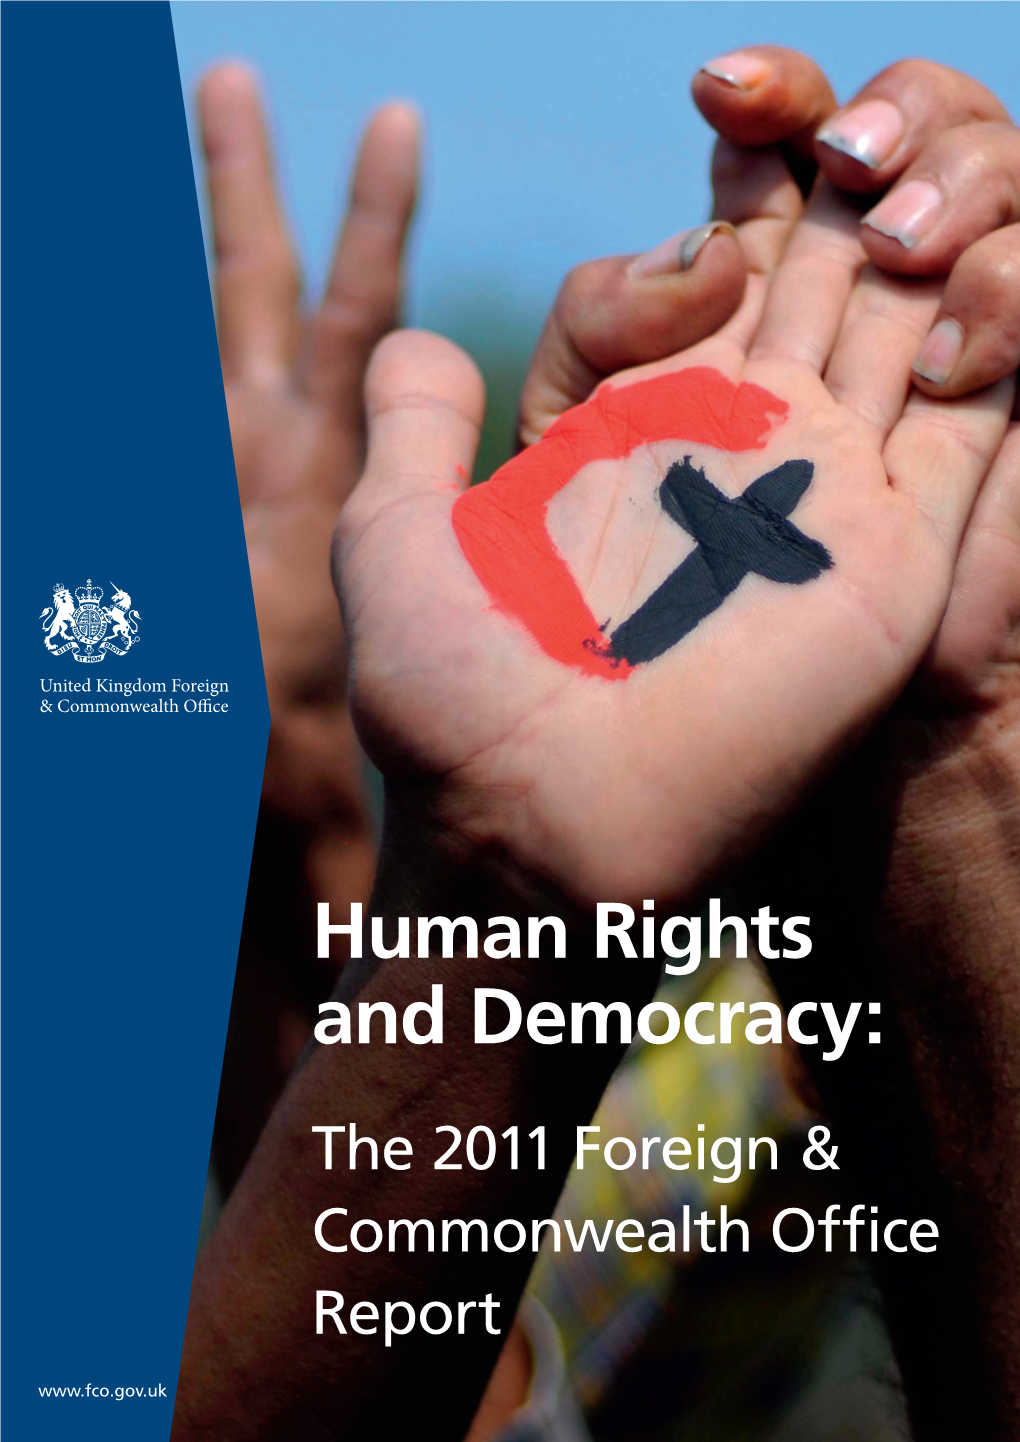 The 2011 Foreign & Commonwealth Office Report